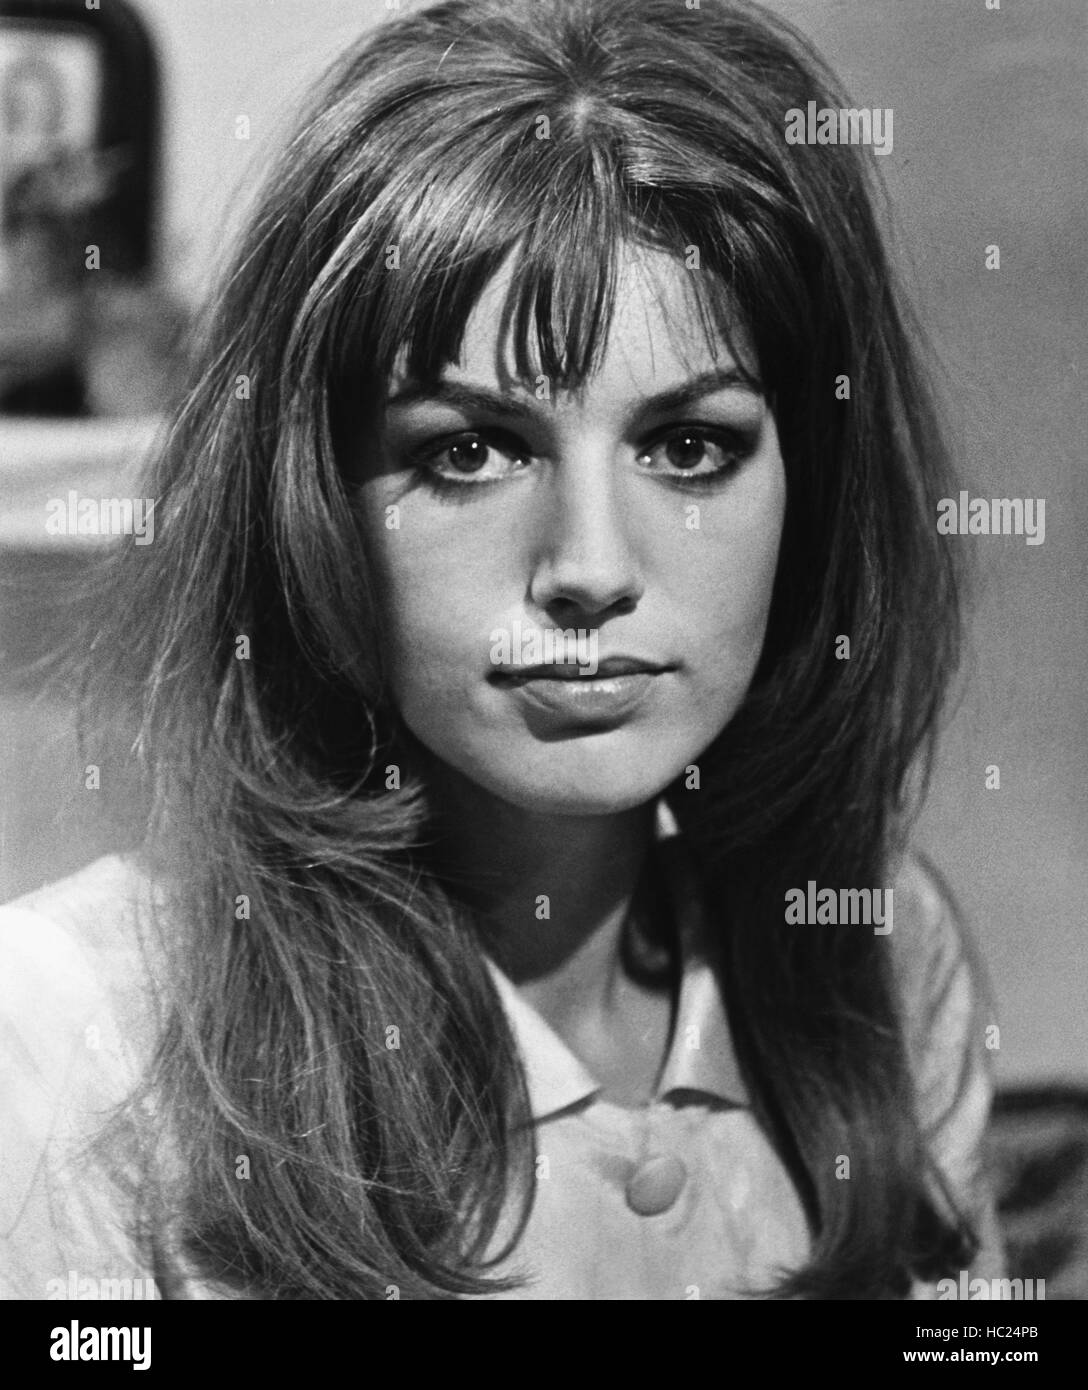 MADE IN ITALY, Catherine Spaak, 1965 Stock Photo - Alamy